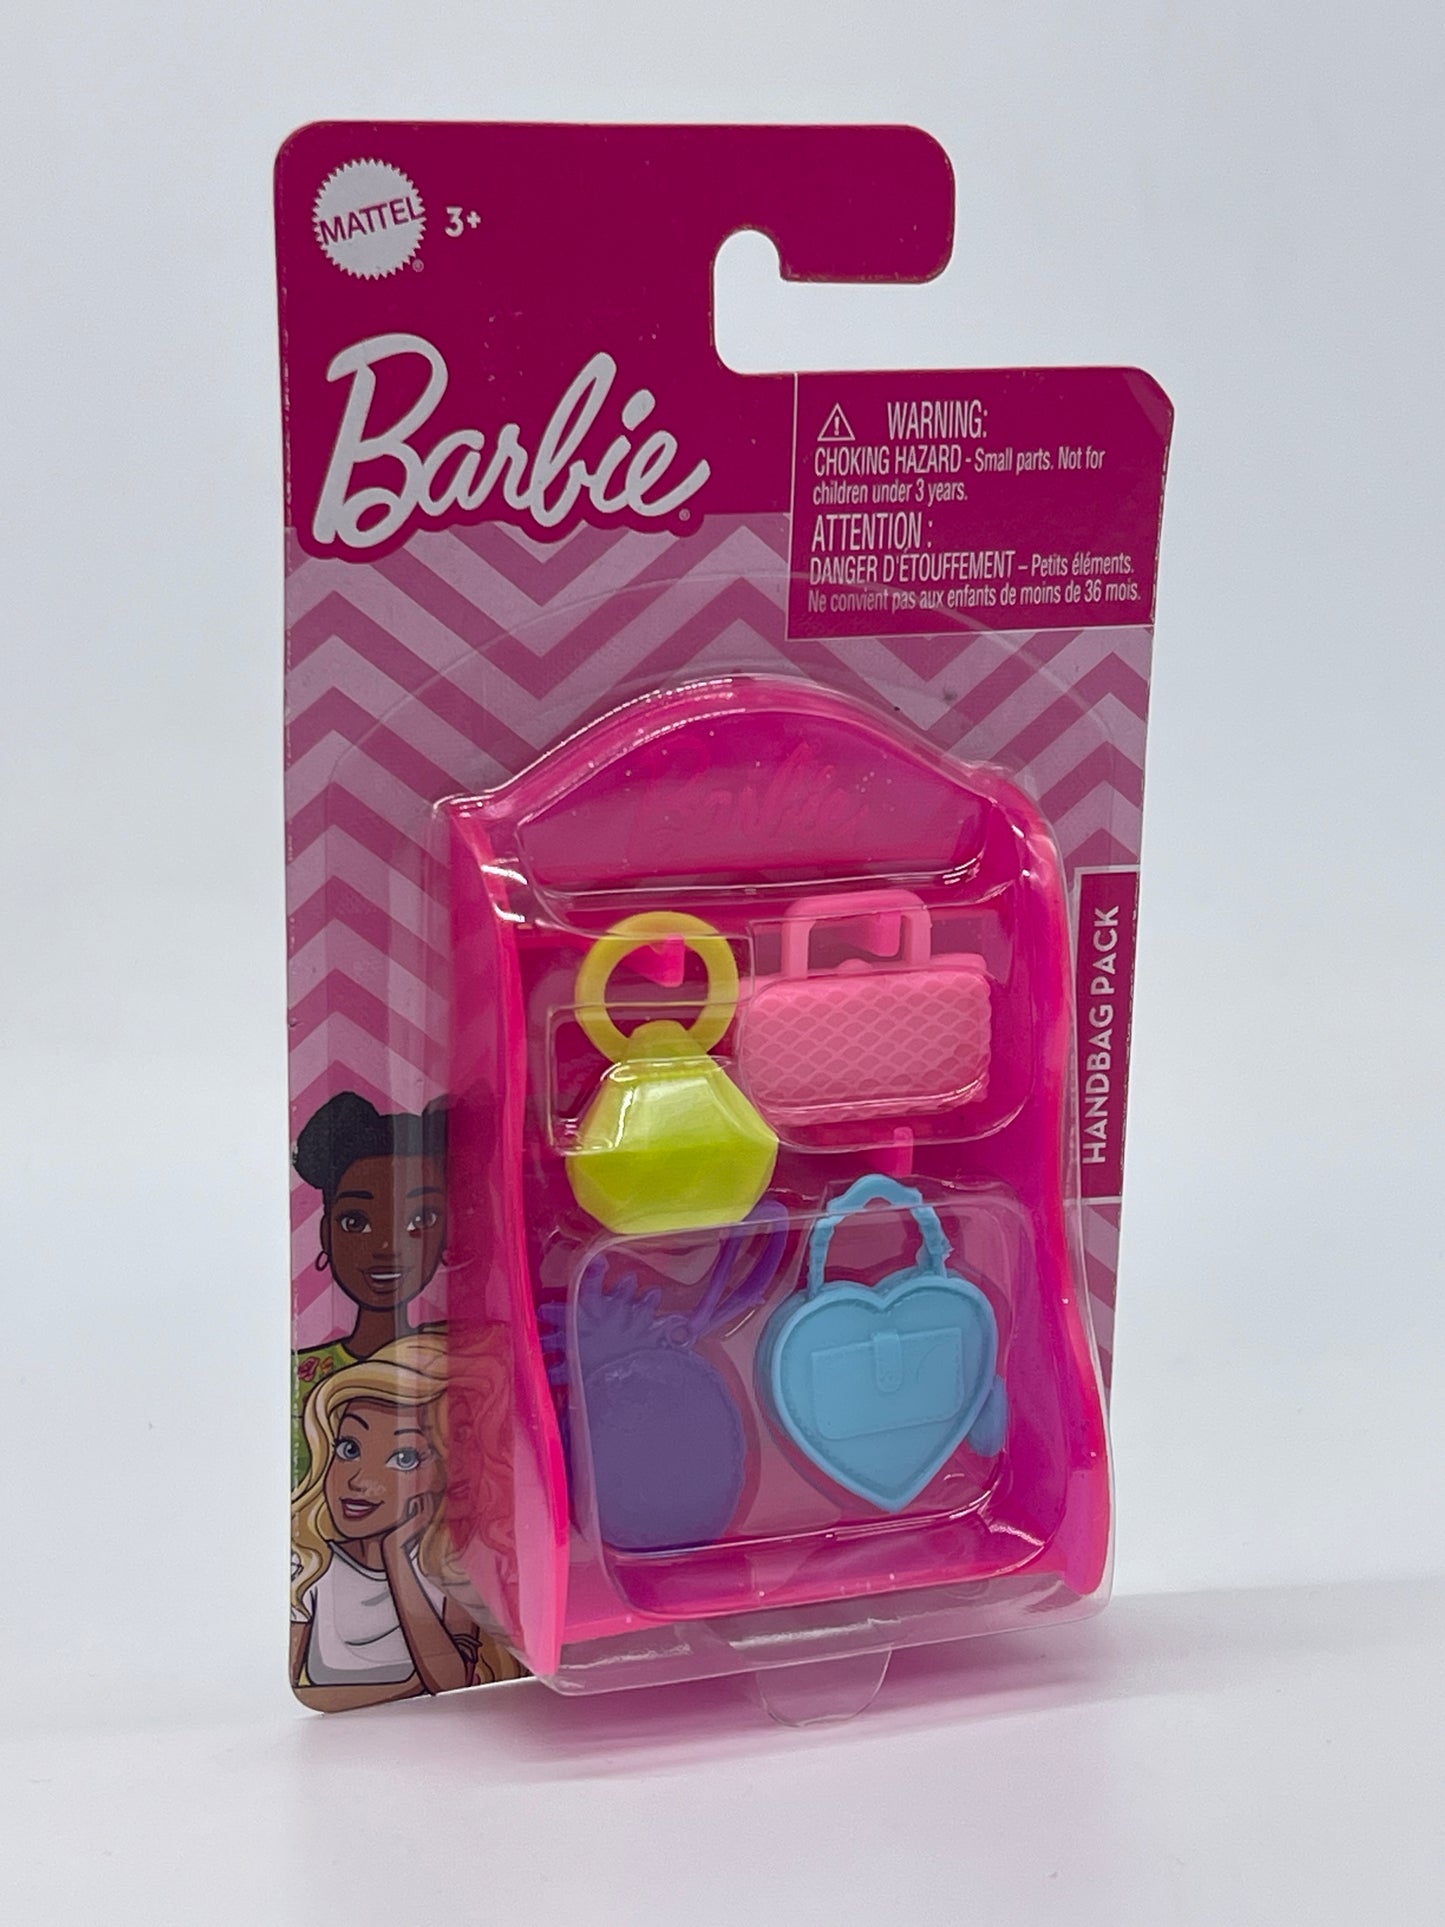 Barbie accessories accessories shelf with shoe pack, handbags, head and neck jewelry